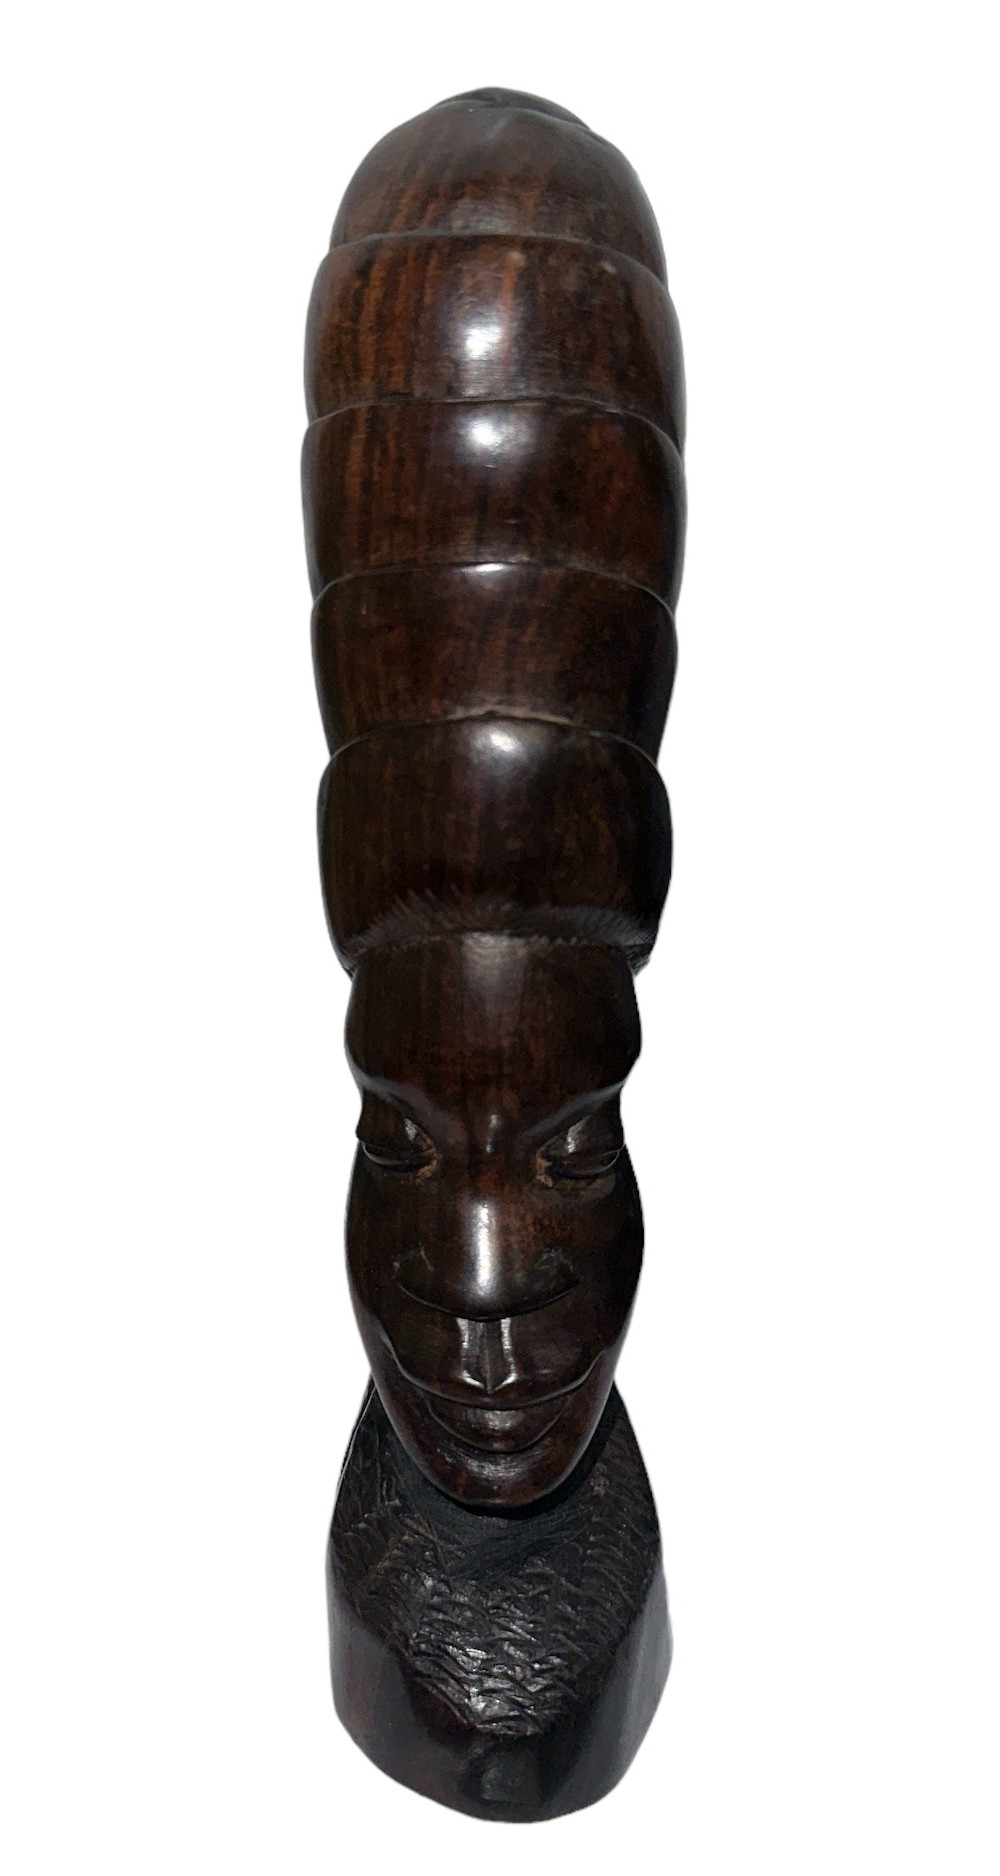 A standing African carved wooden sculpture in the shape of a woman’s head with a phallic design - Image 3 of 4